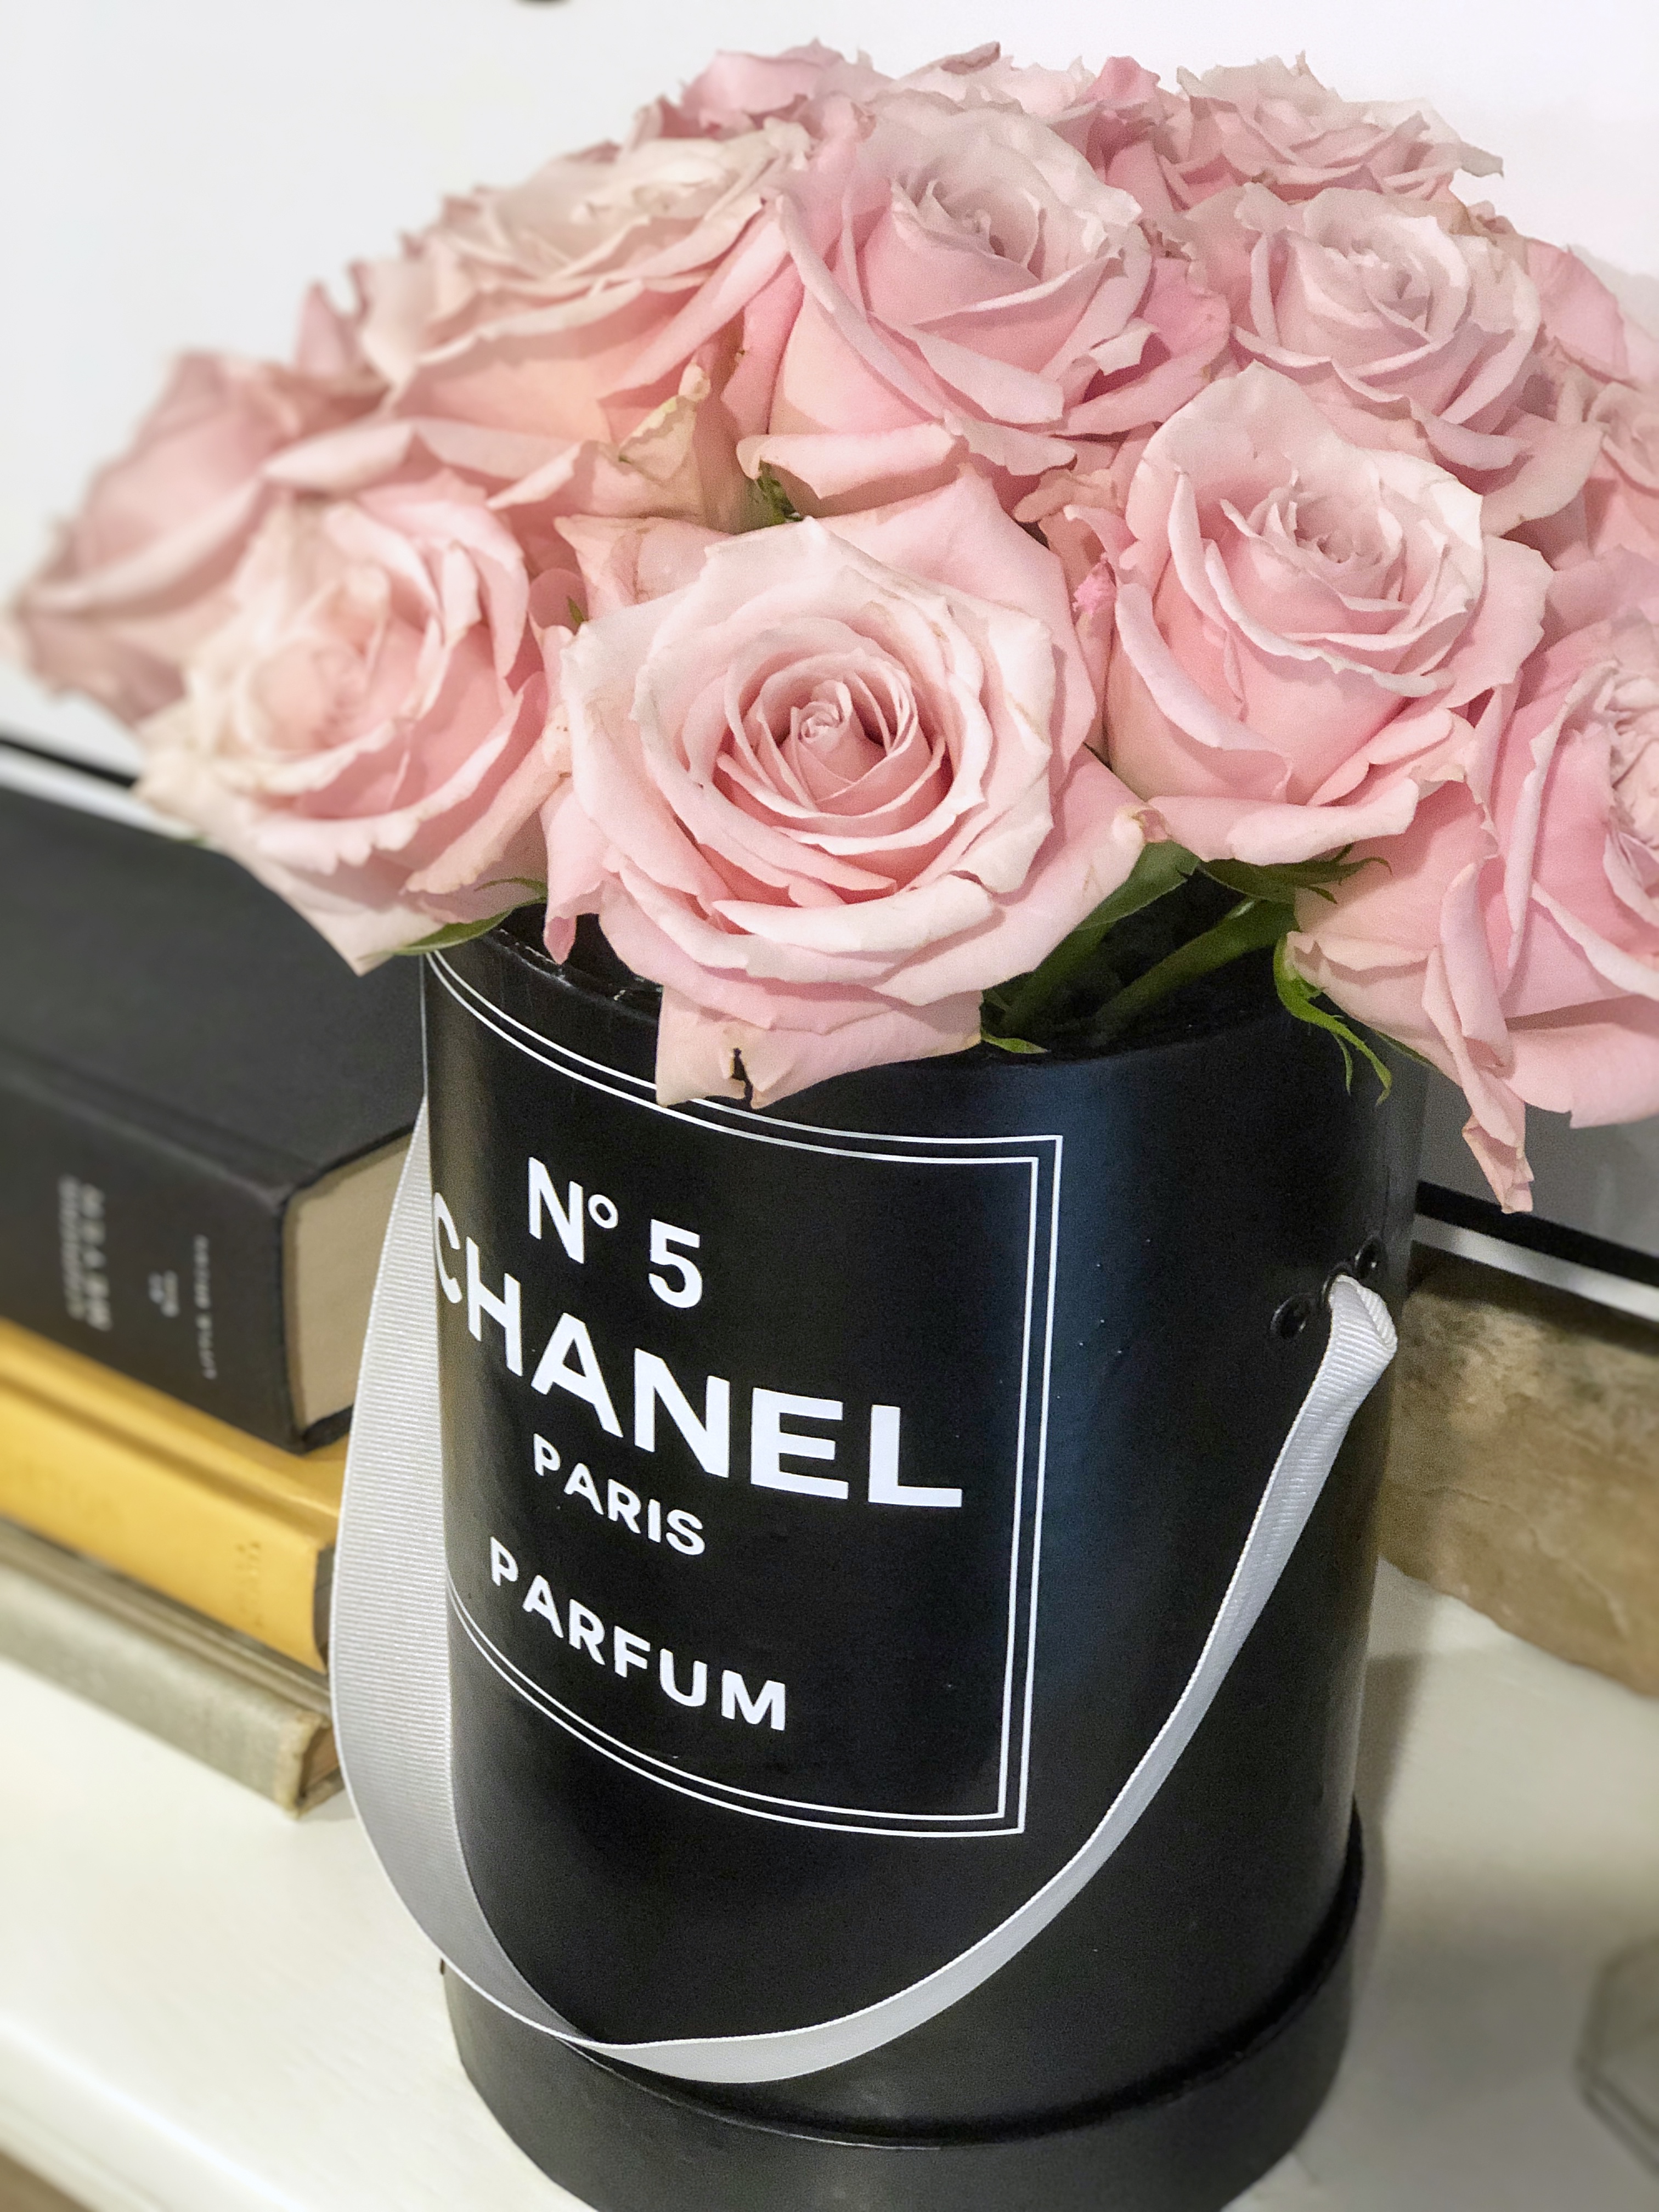 Coco Chanel Birthday Party Decoration Themes Ideas - Chanel Cake & Backdrop